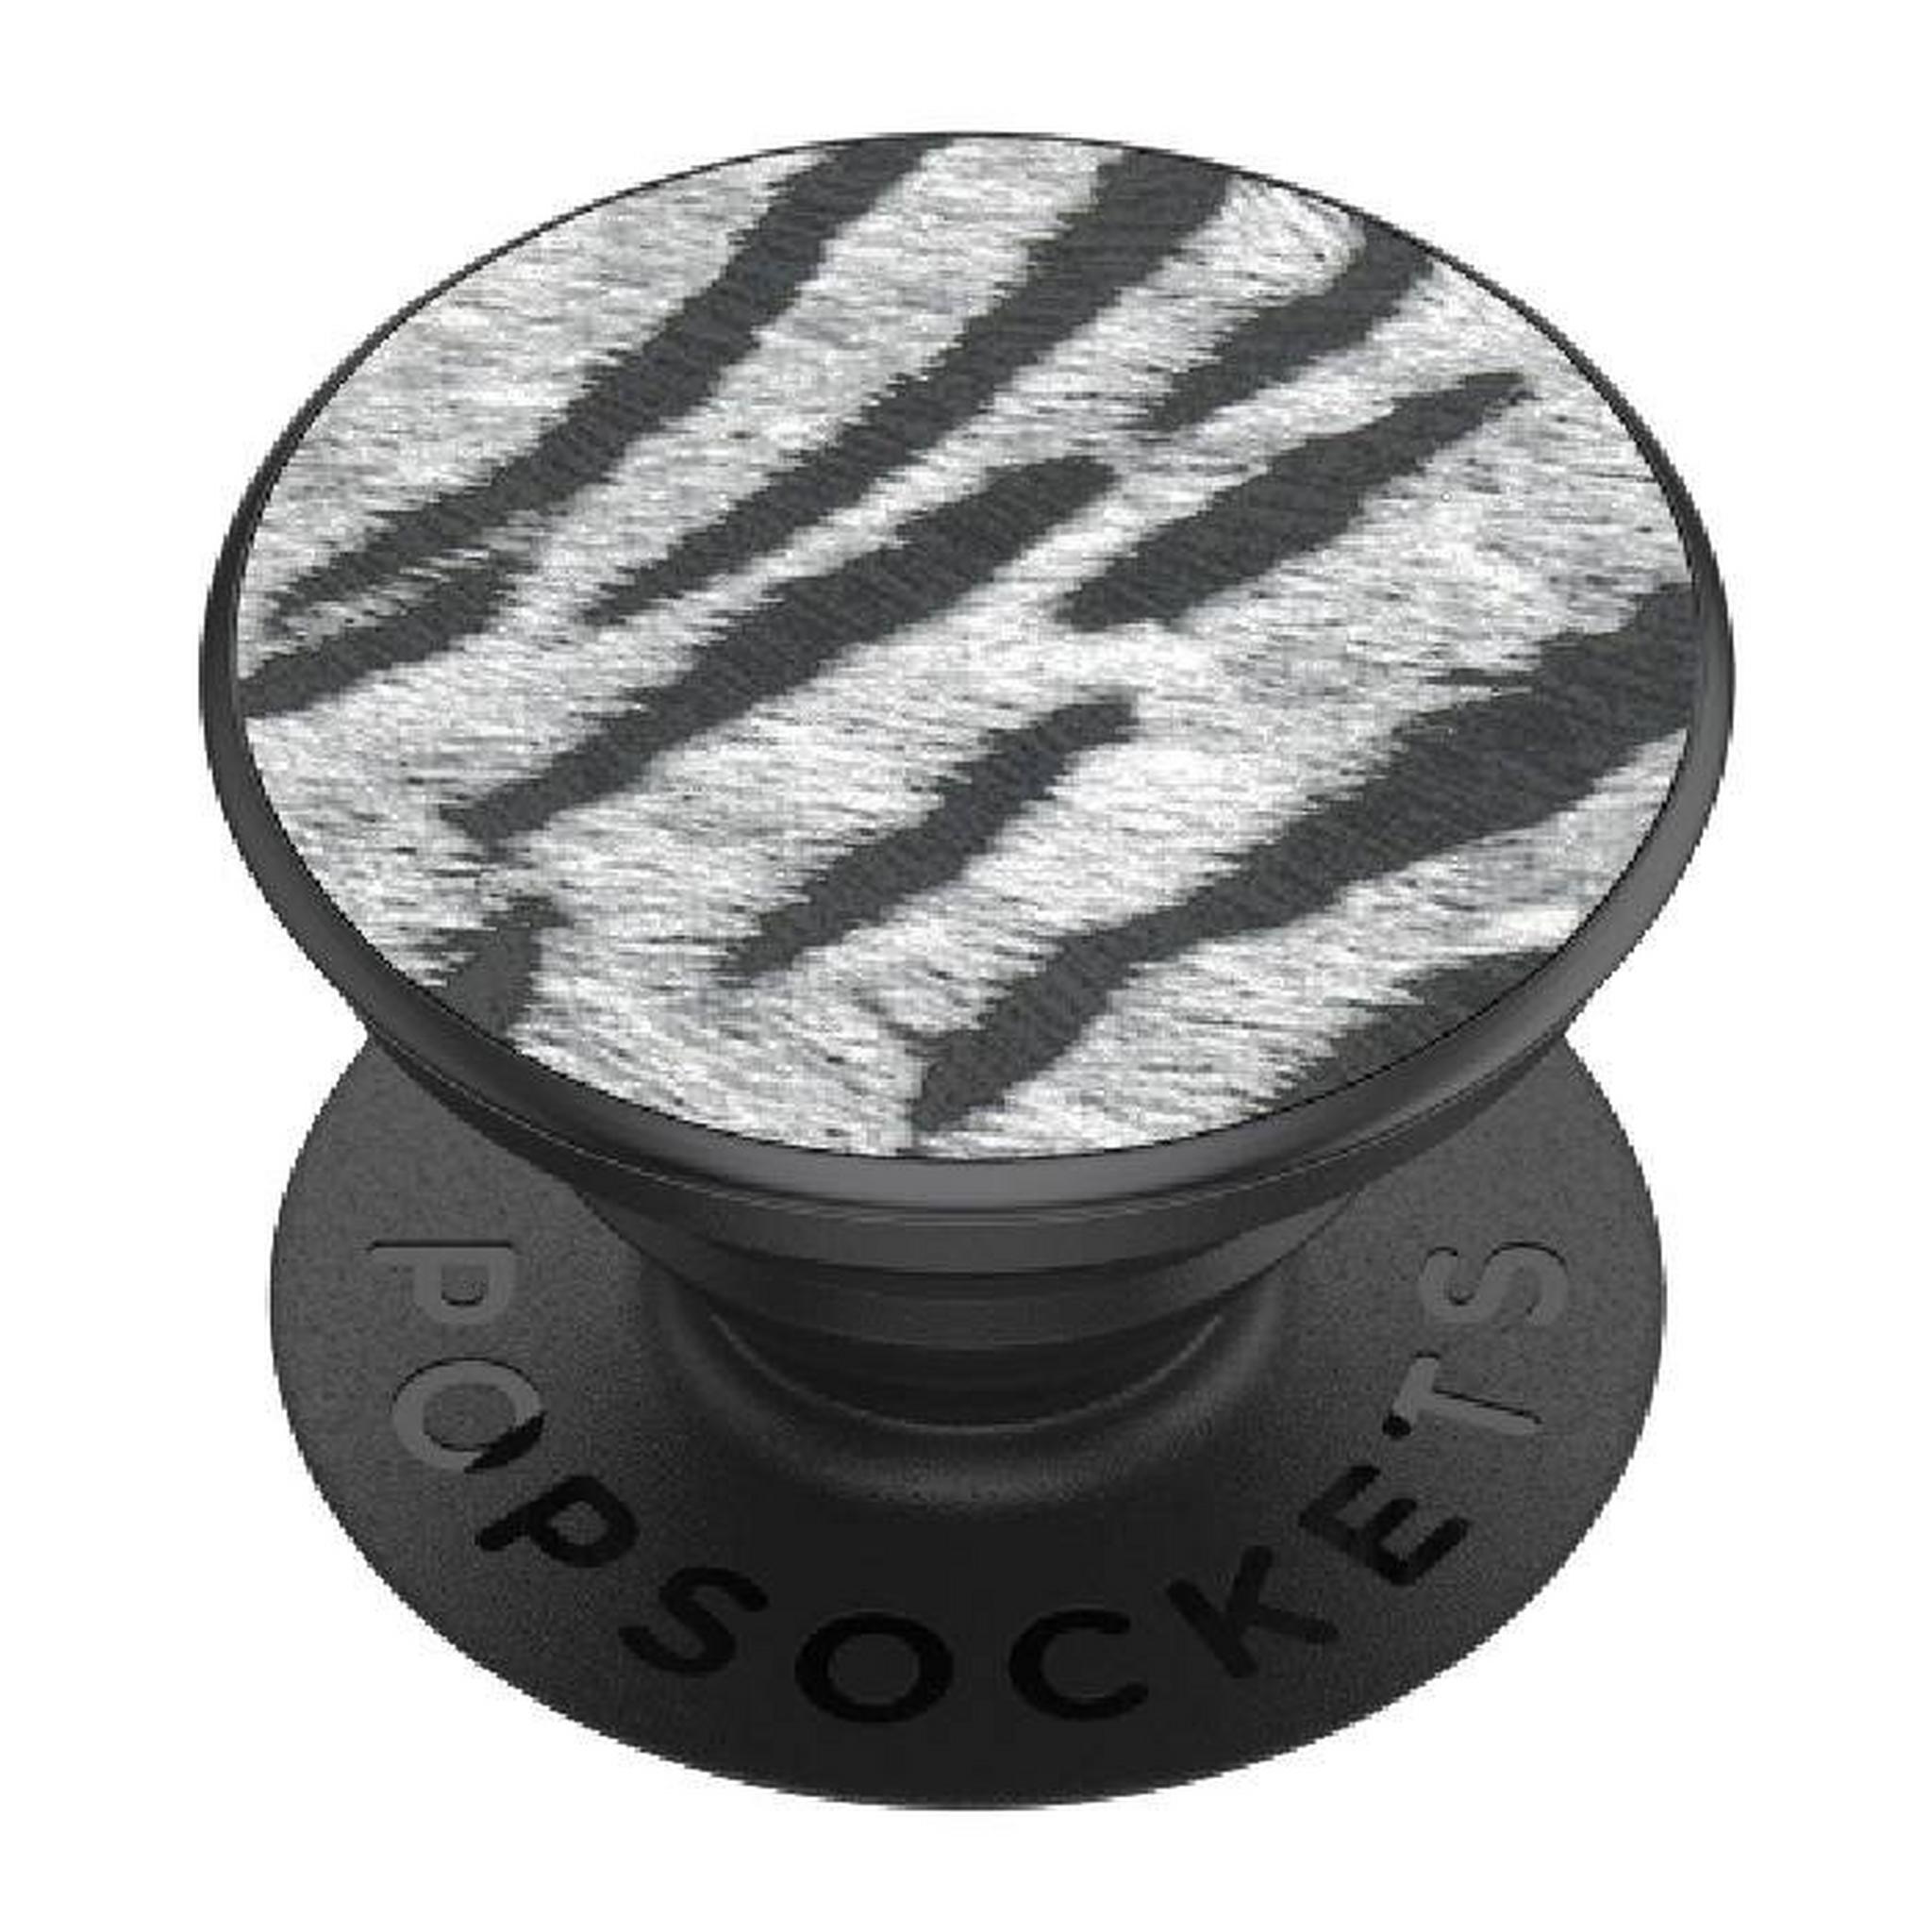 PopSockets Phone Stand and Grip (802441) – Vegan Leather Zebra